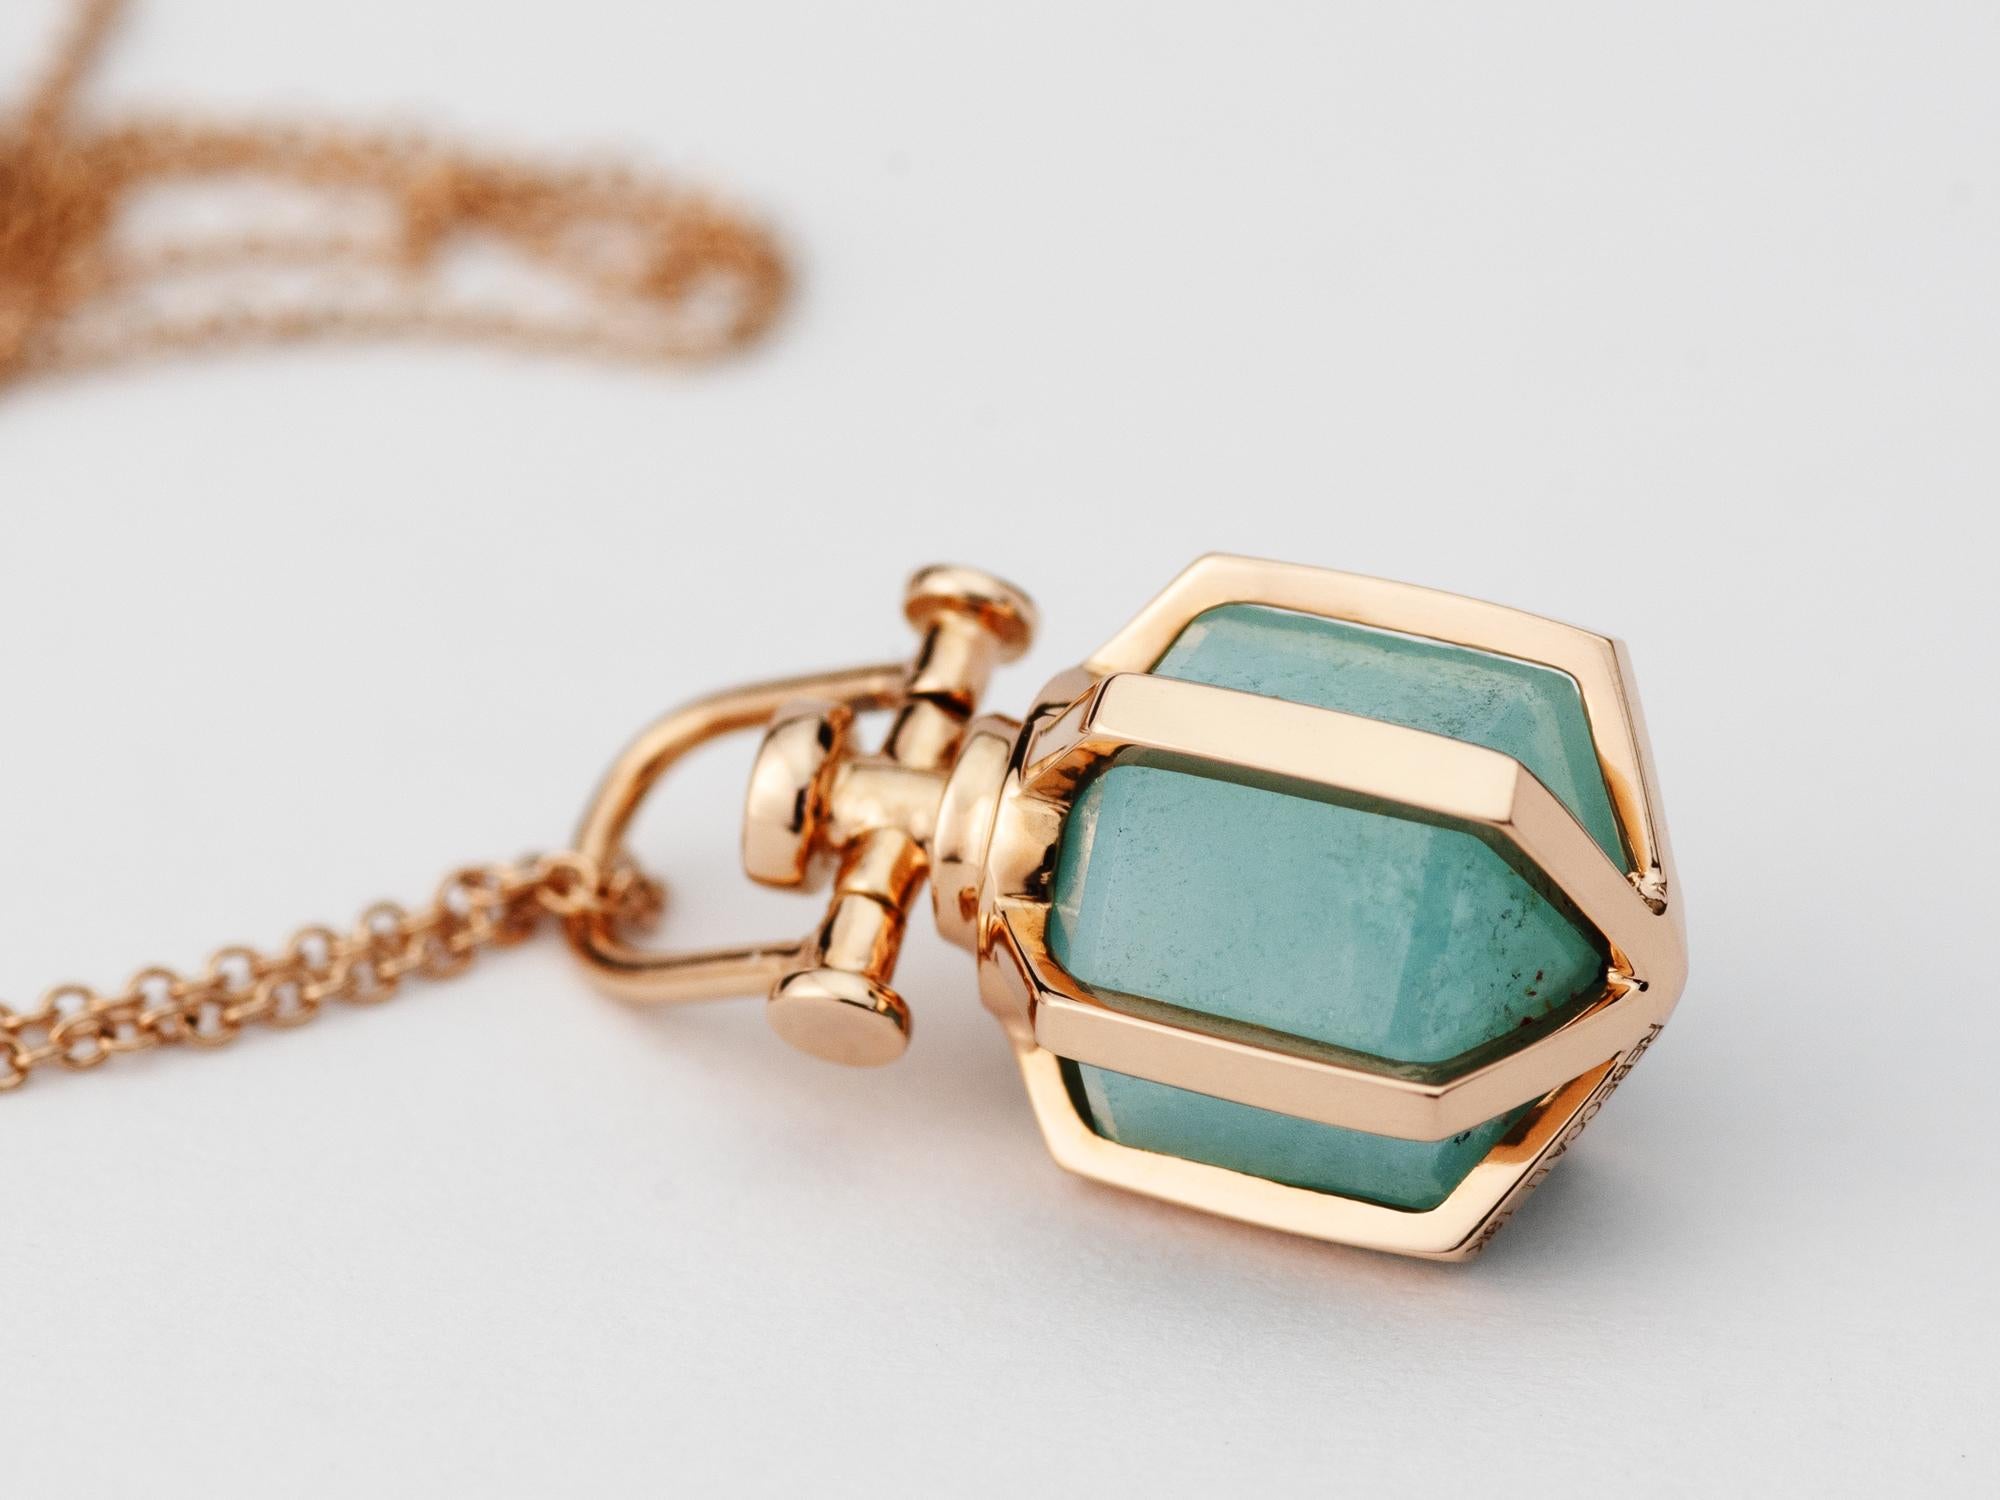 Rebecca Li designs mindfulness.
This dainty talisman necklace is from her signature Six Senses Talisman Collection.

Amazonite means harmony, relaxation and calm.

Talisman Pendant :
18K Rose Gold
Amazonite
Pendant Size: 10 mm W * 10 mm D * 18 mm